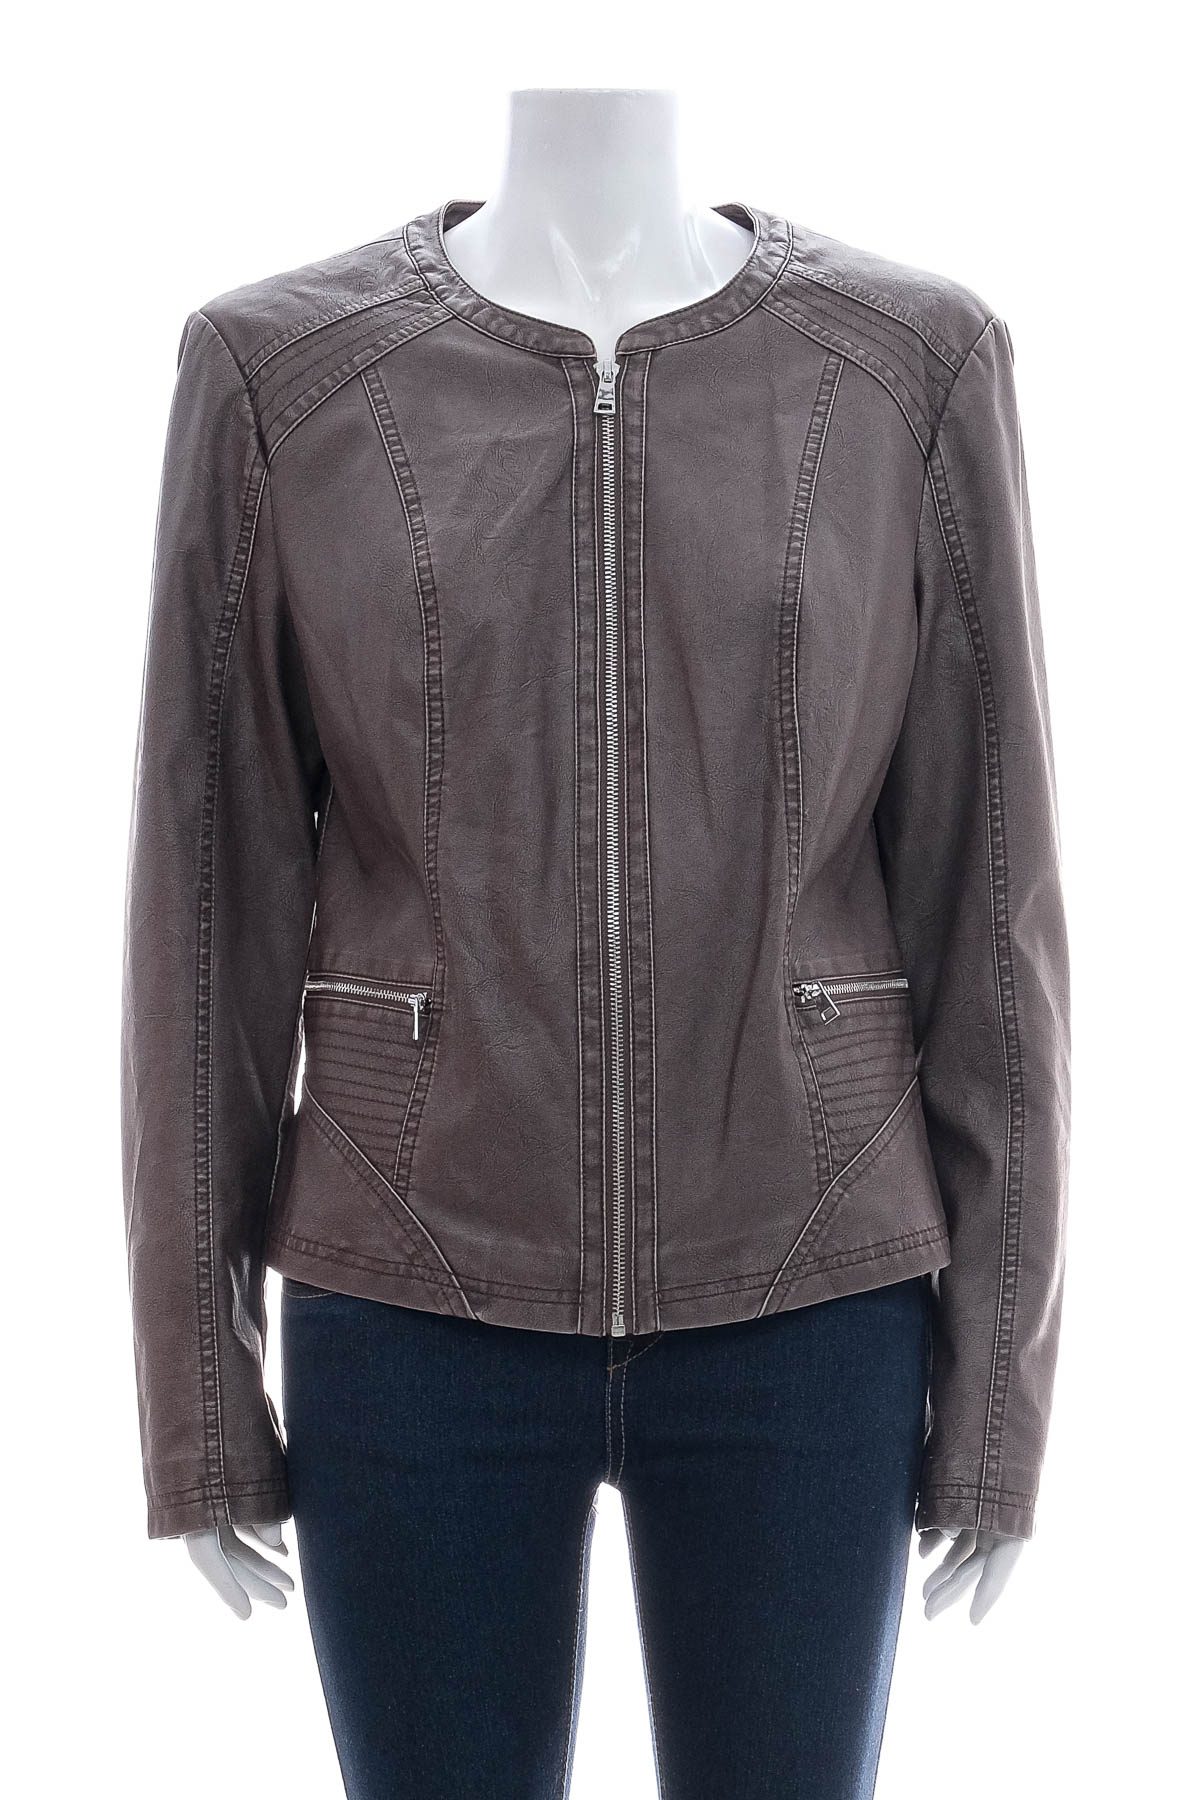 Women's leather jacket - Orsay - 0